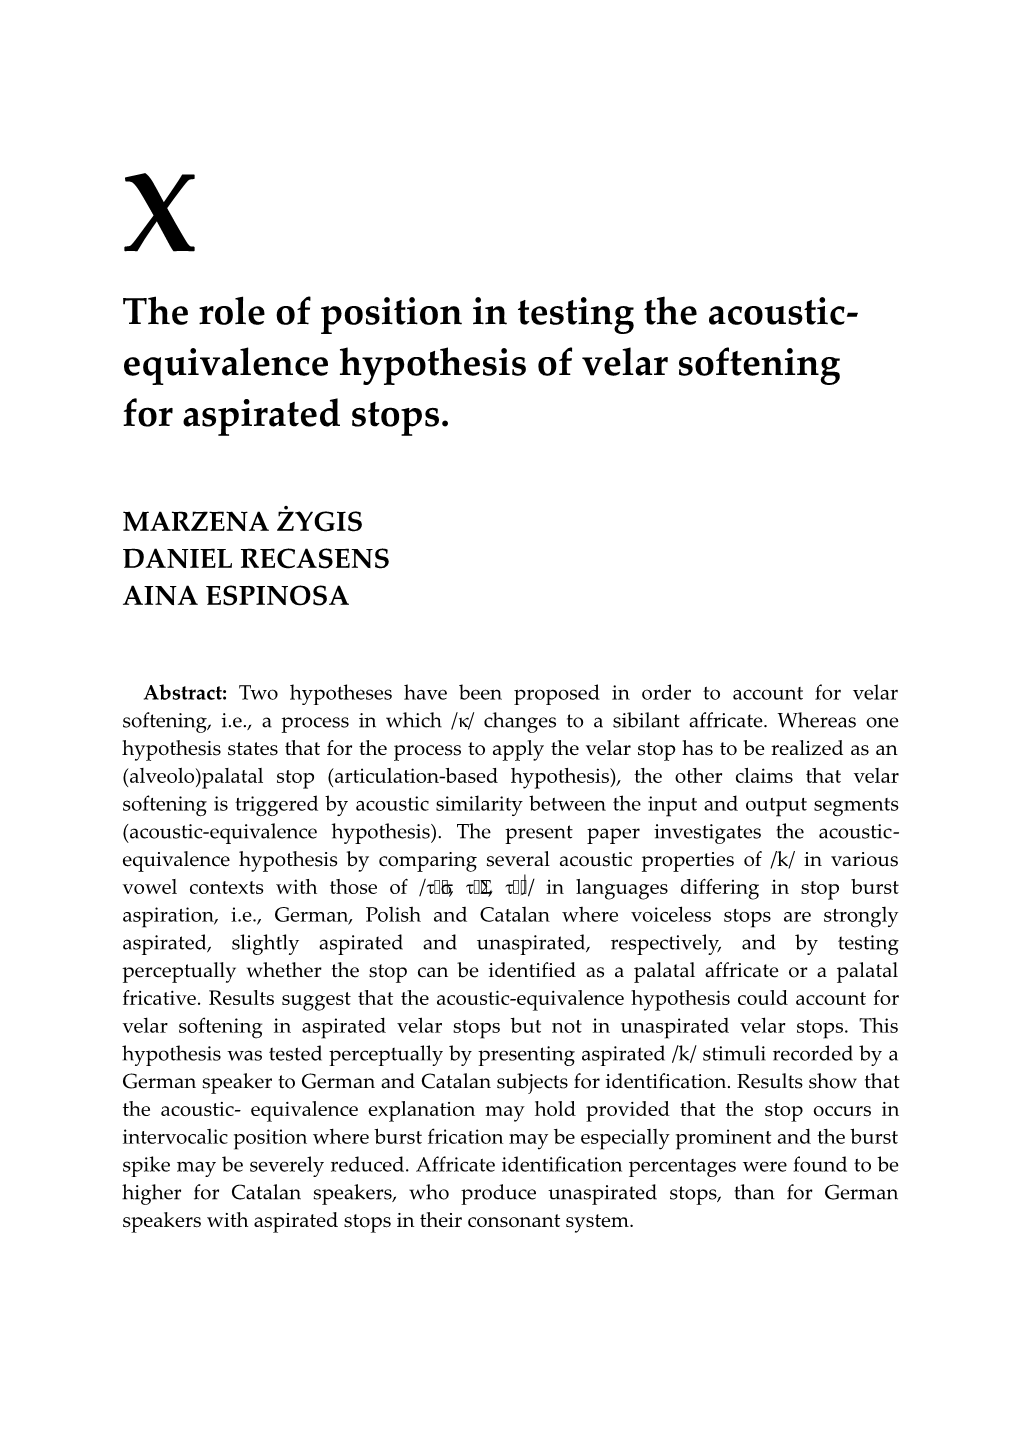 The Role of Position in Testing the Acoustic- Equivalence Hypothesis of Velar Softening